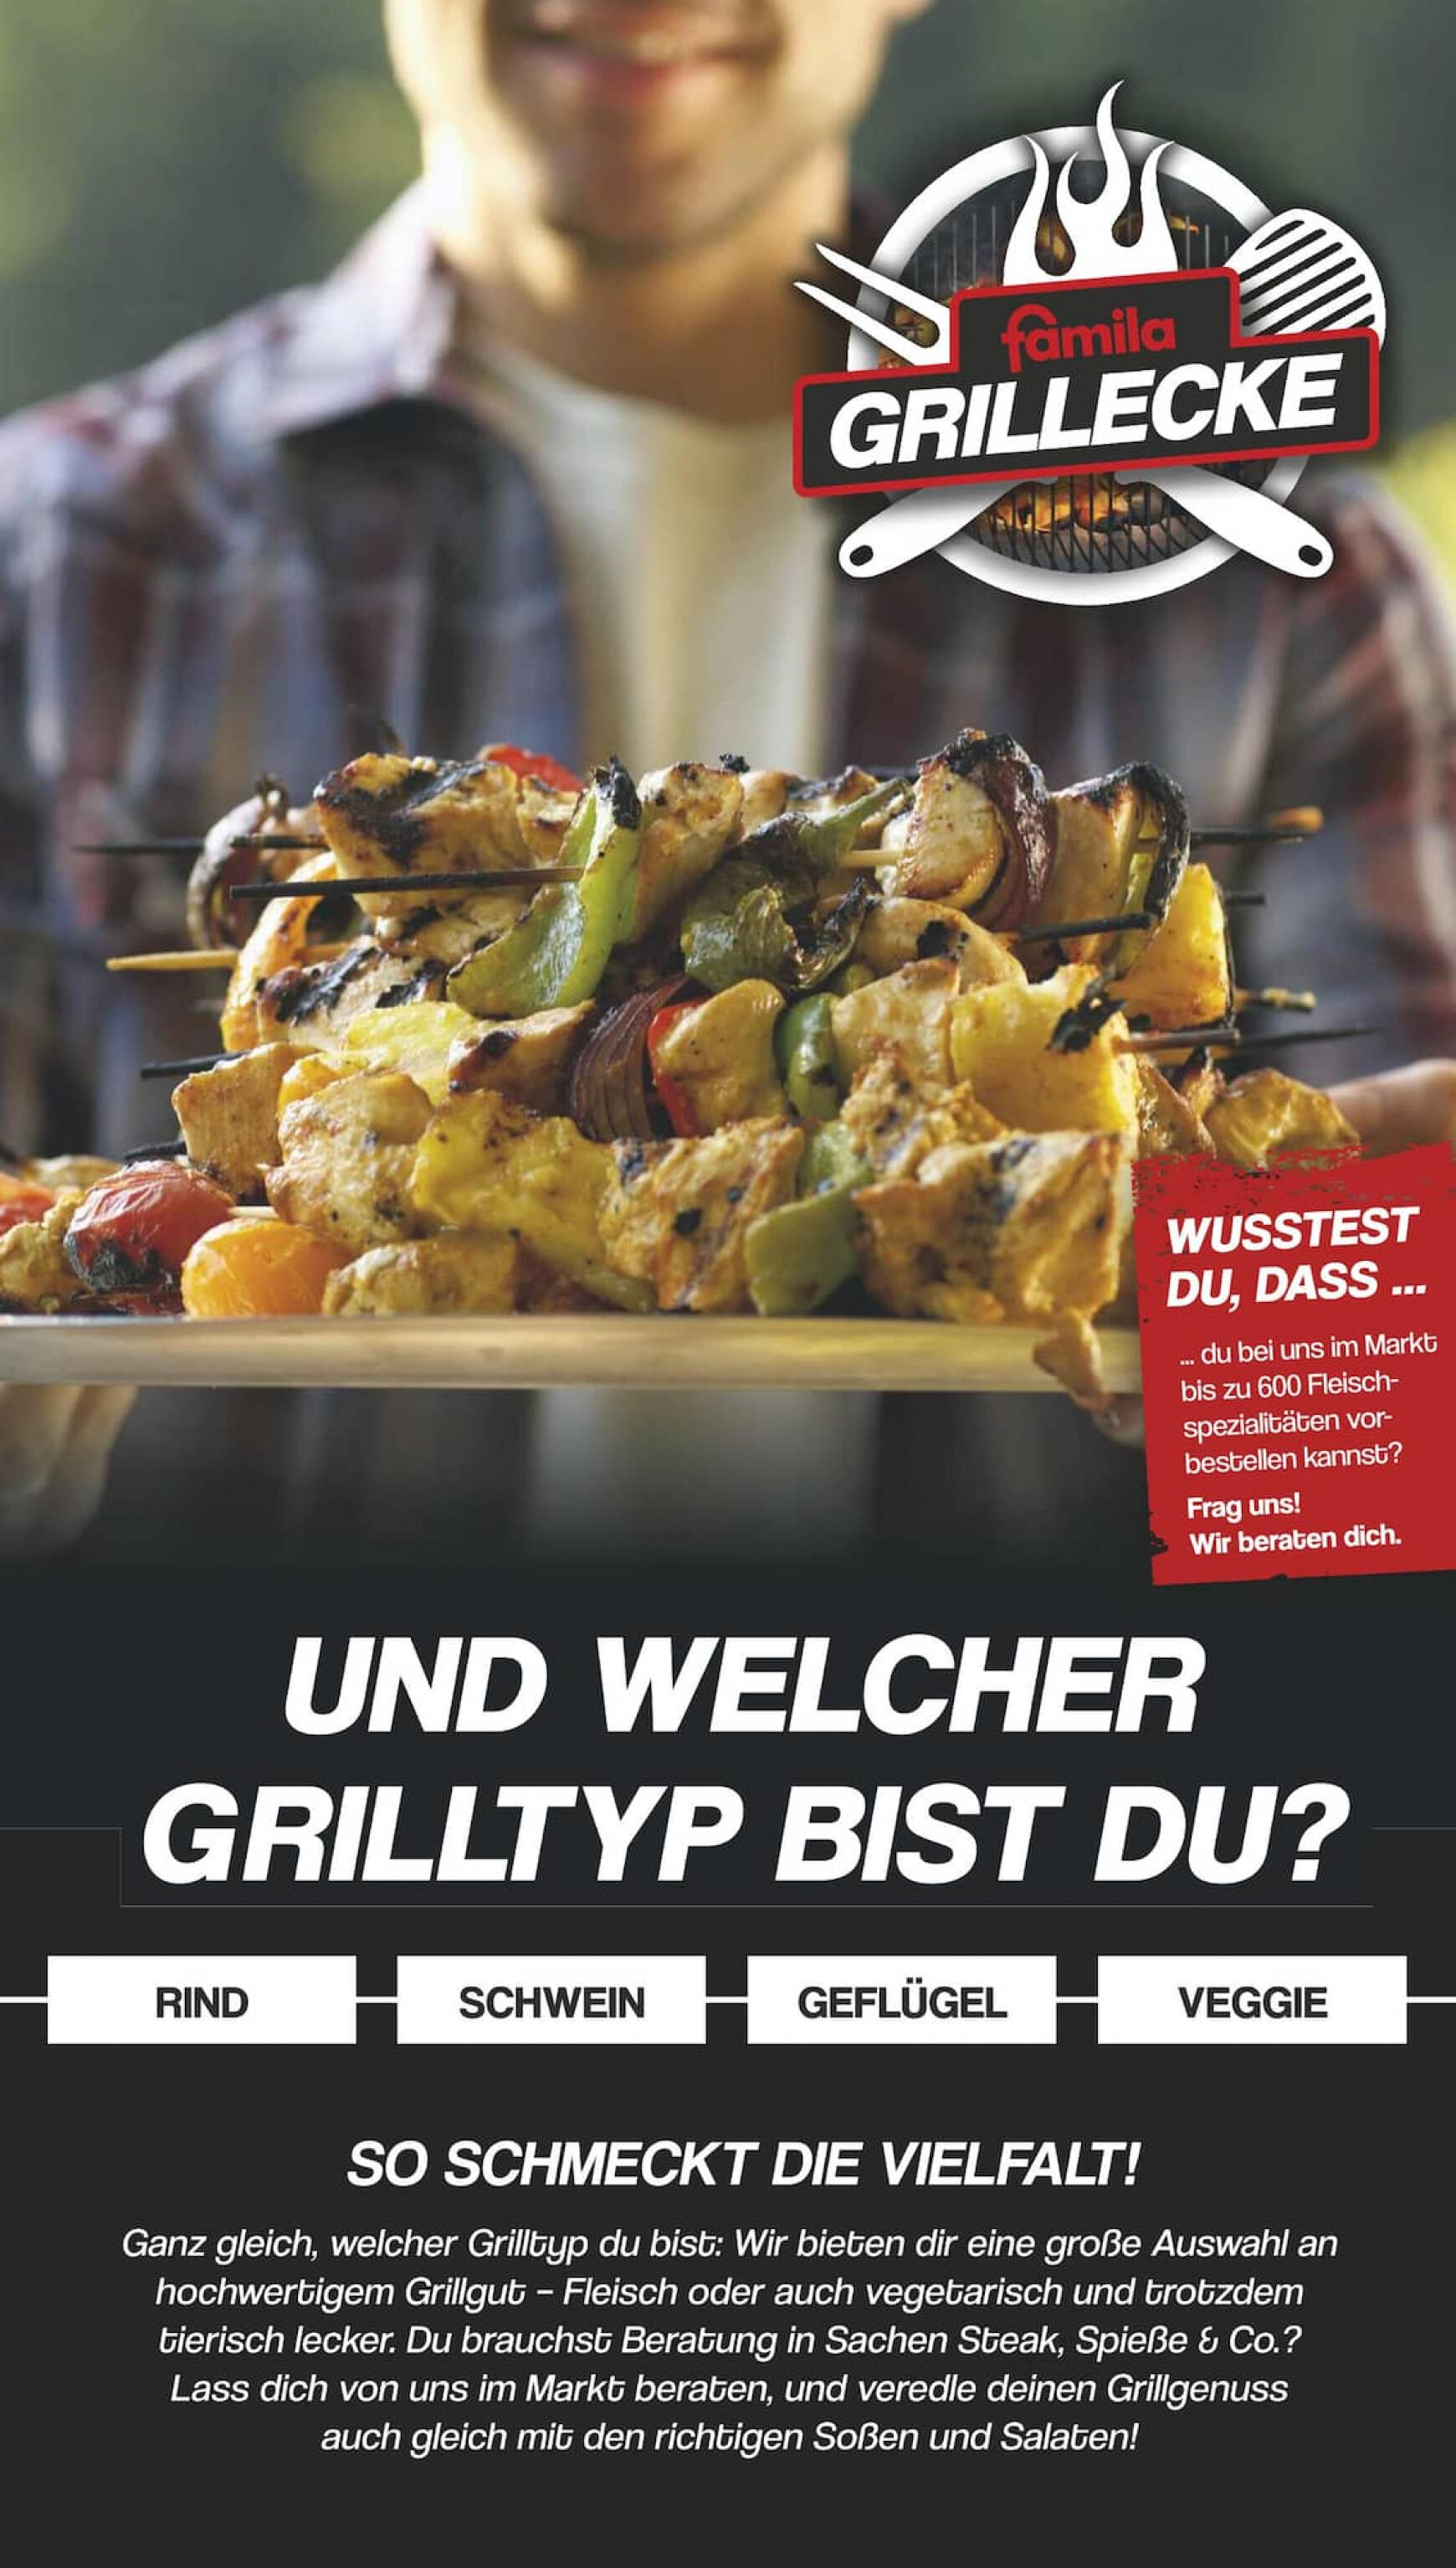 famila-nordwest - Flyer Famila Nordwest - Famila Grillecke aktuell 21.04. - 27.04. - page: 1